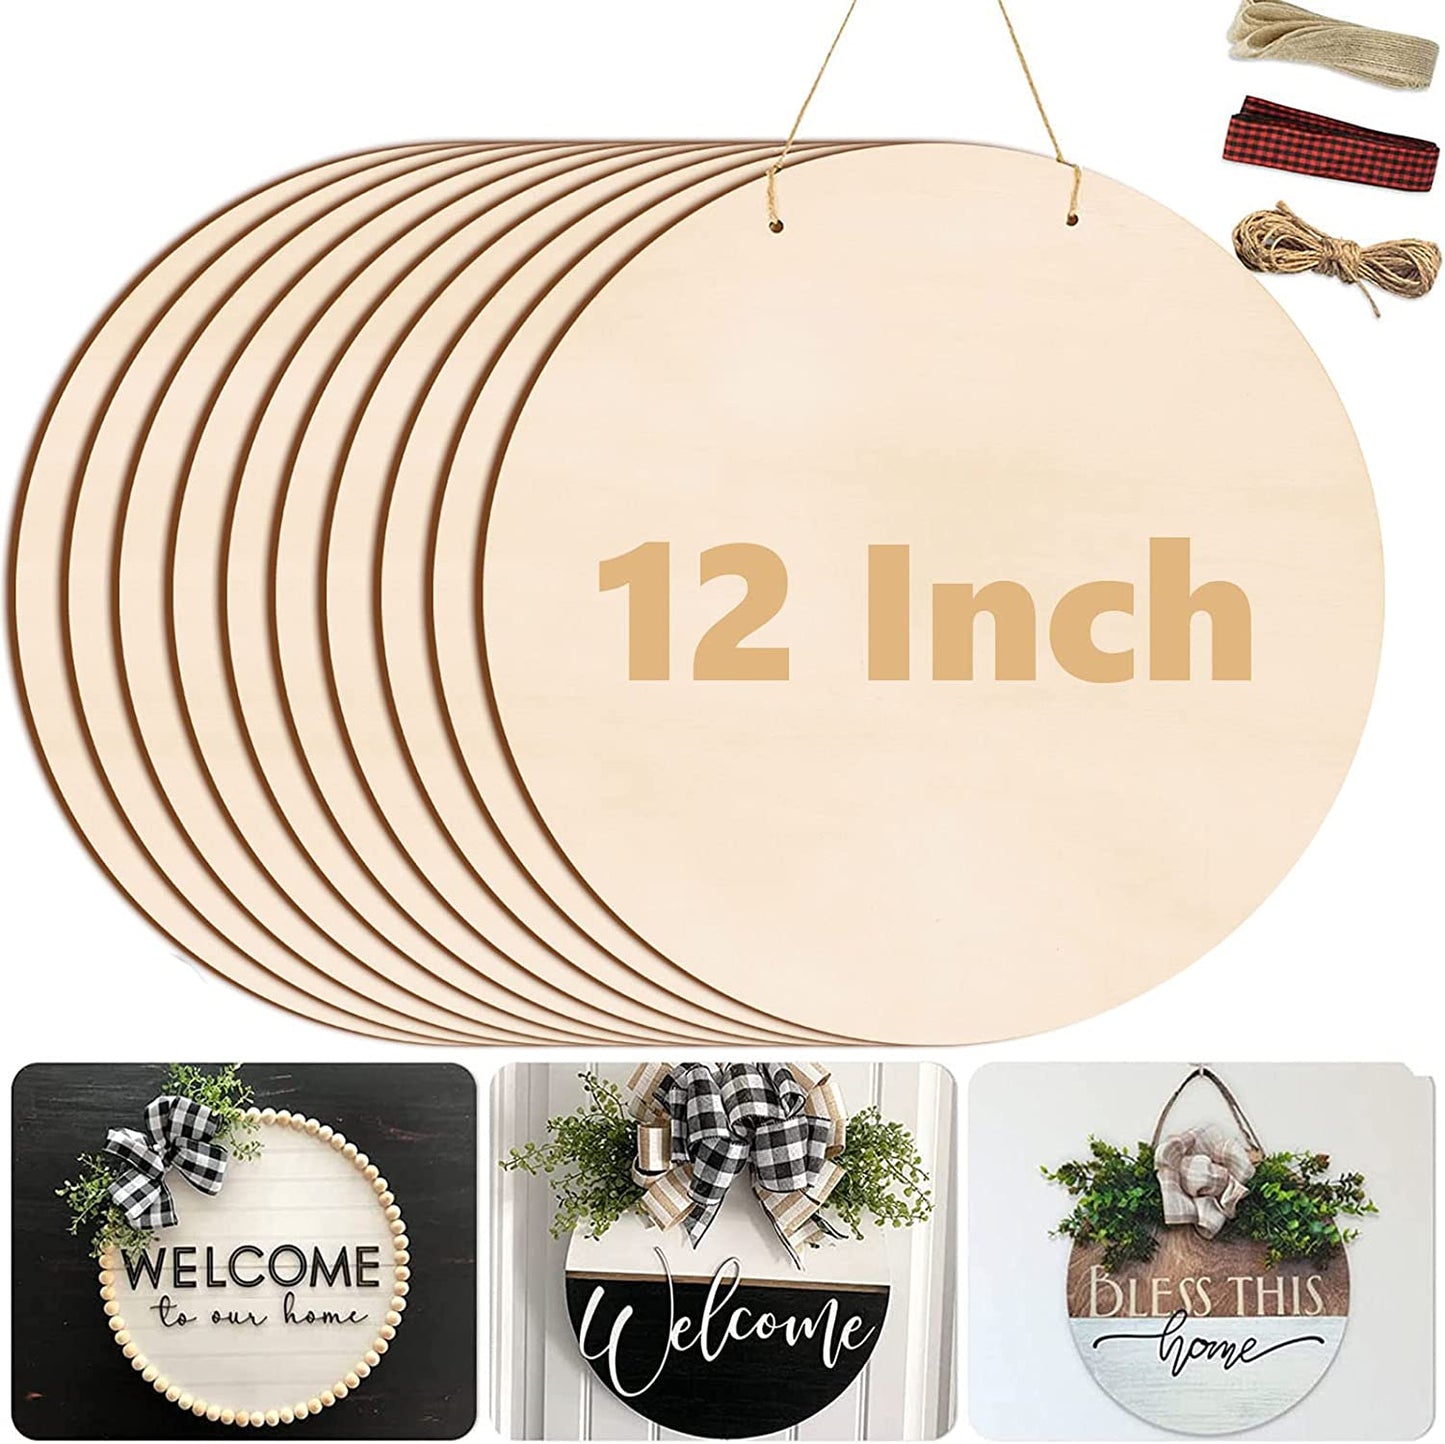 12 Inch Wood Circles for Crafts, 5Pcs Unfinished Wood Crafts, DIY Wood Rounds for Cricut Projects, Door Hanger, Wood Burning, Painting, Independence Day Decor, Holiday Home Decorations (5PCS)